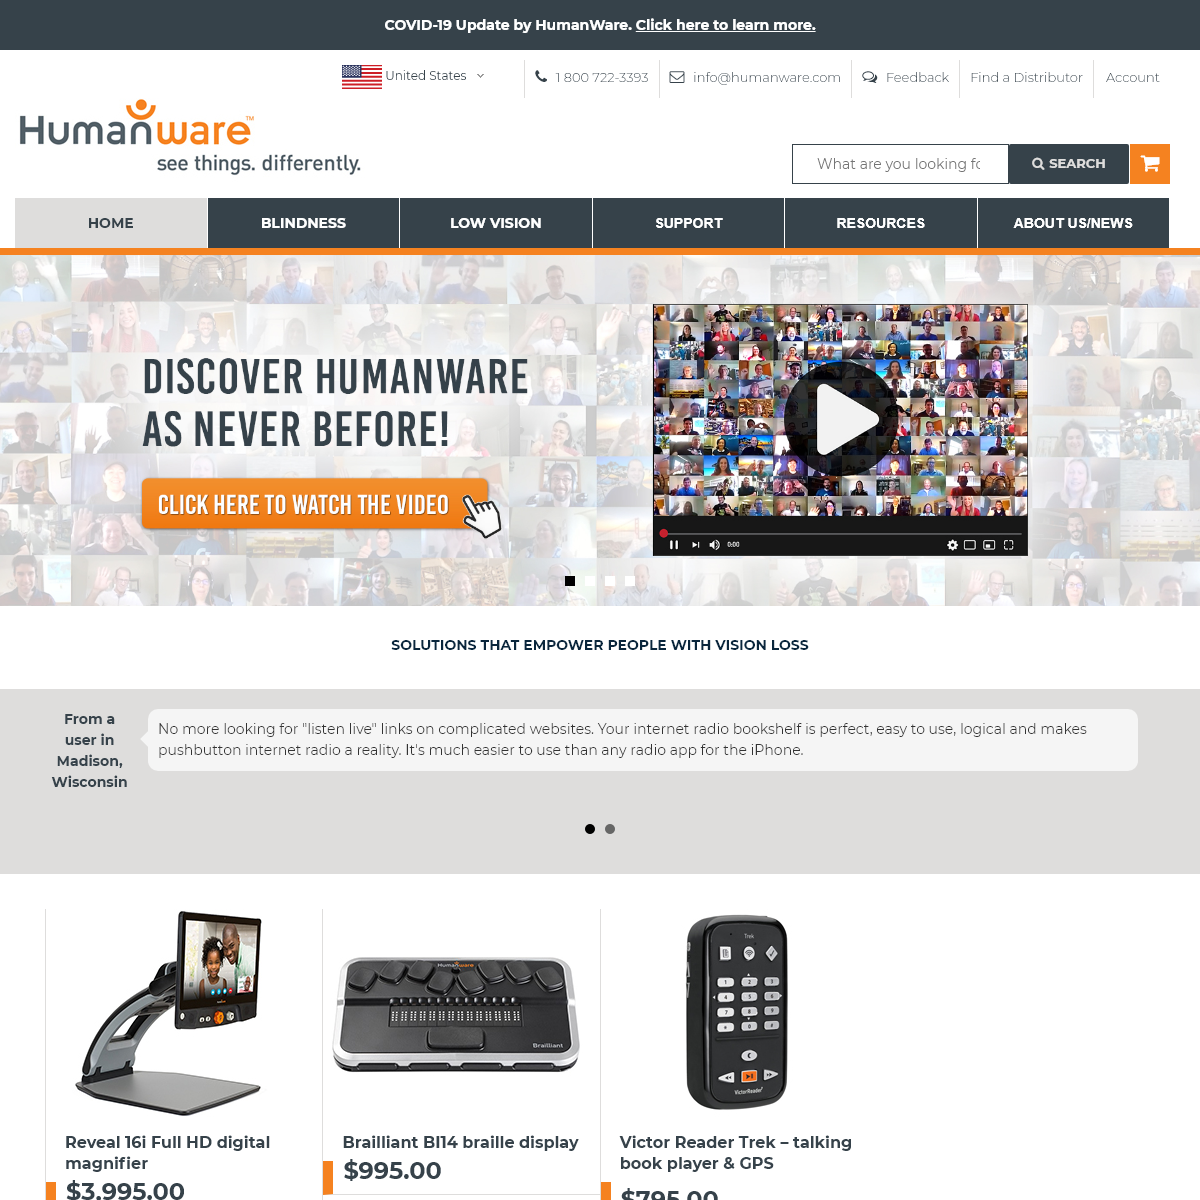 Humanware - Home - Low Vision Aids for Macular Degeneration